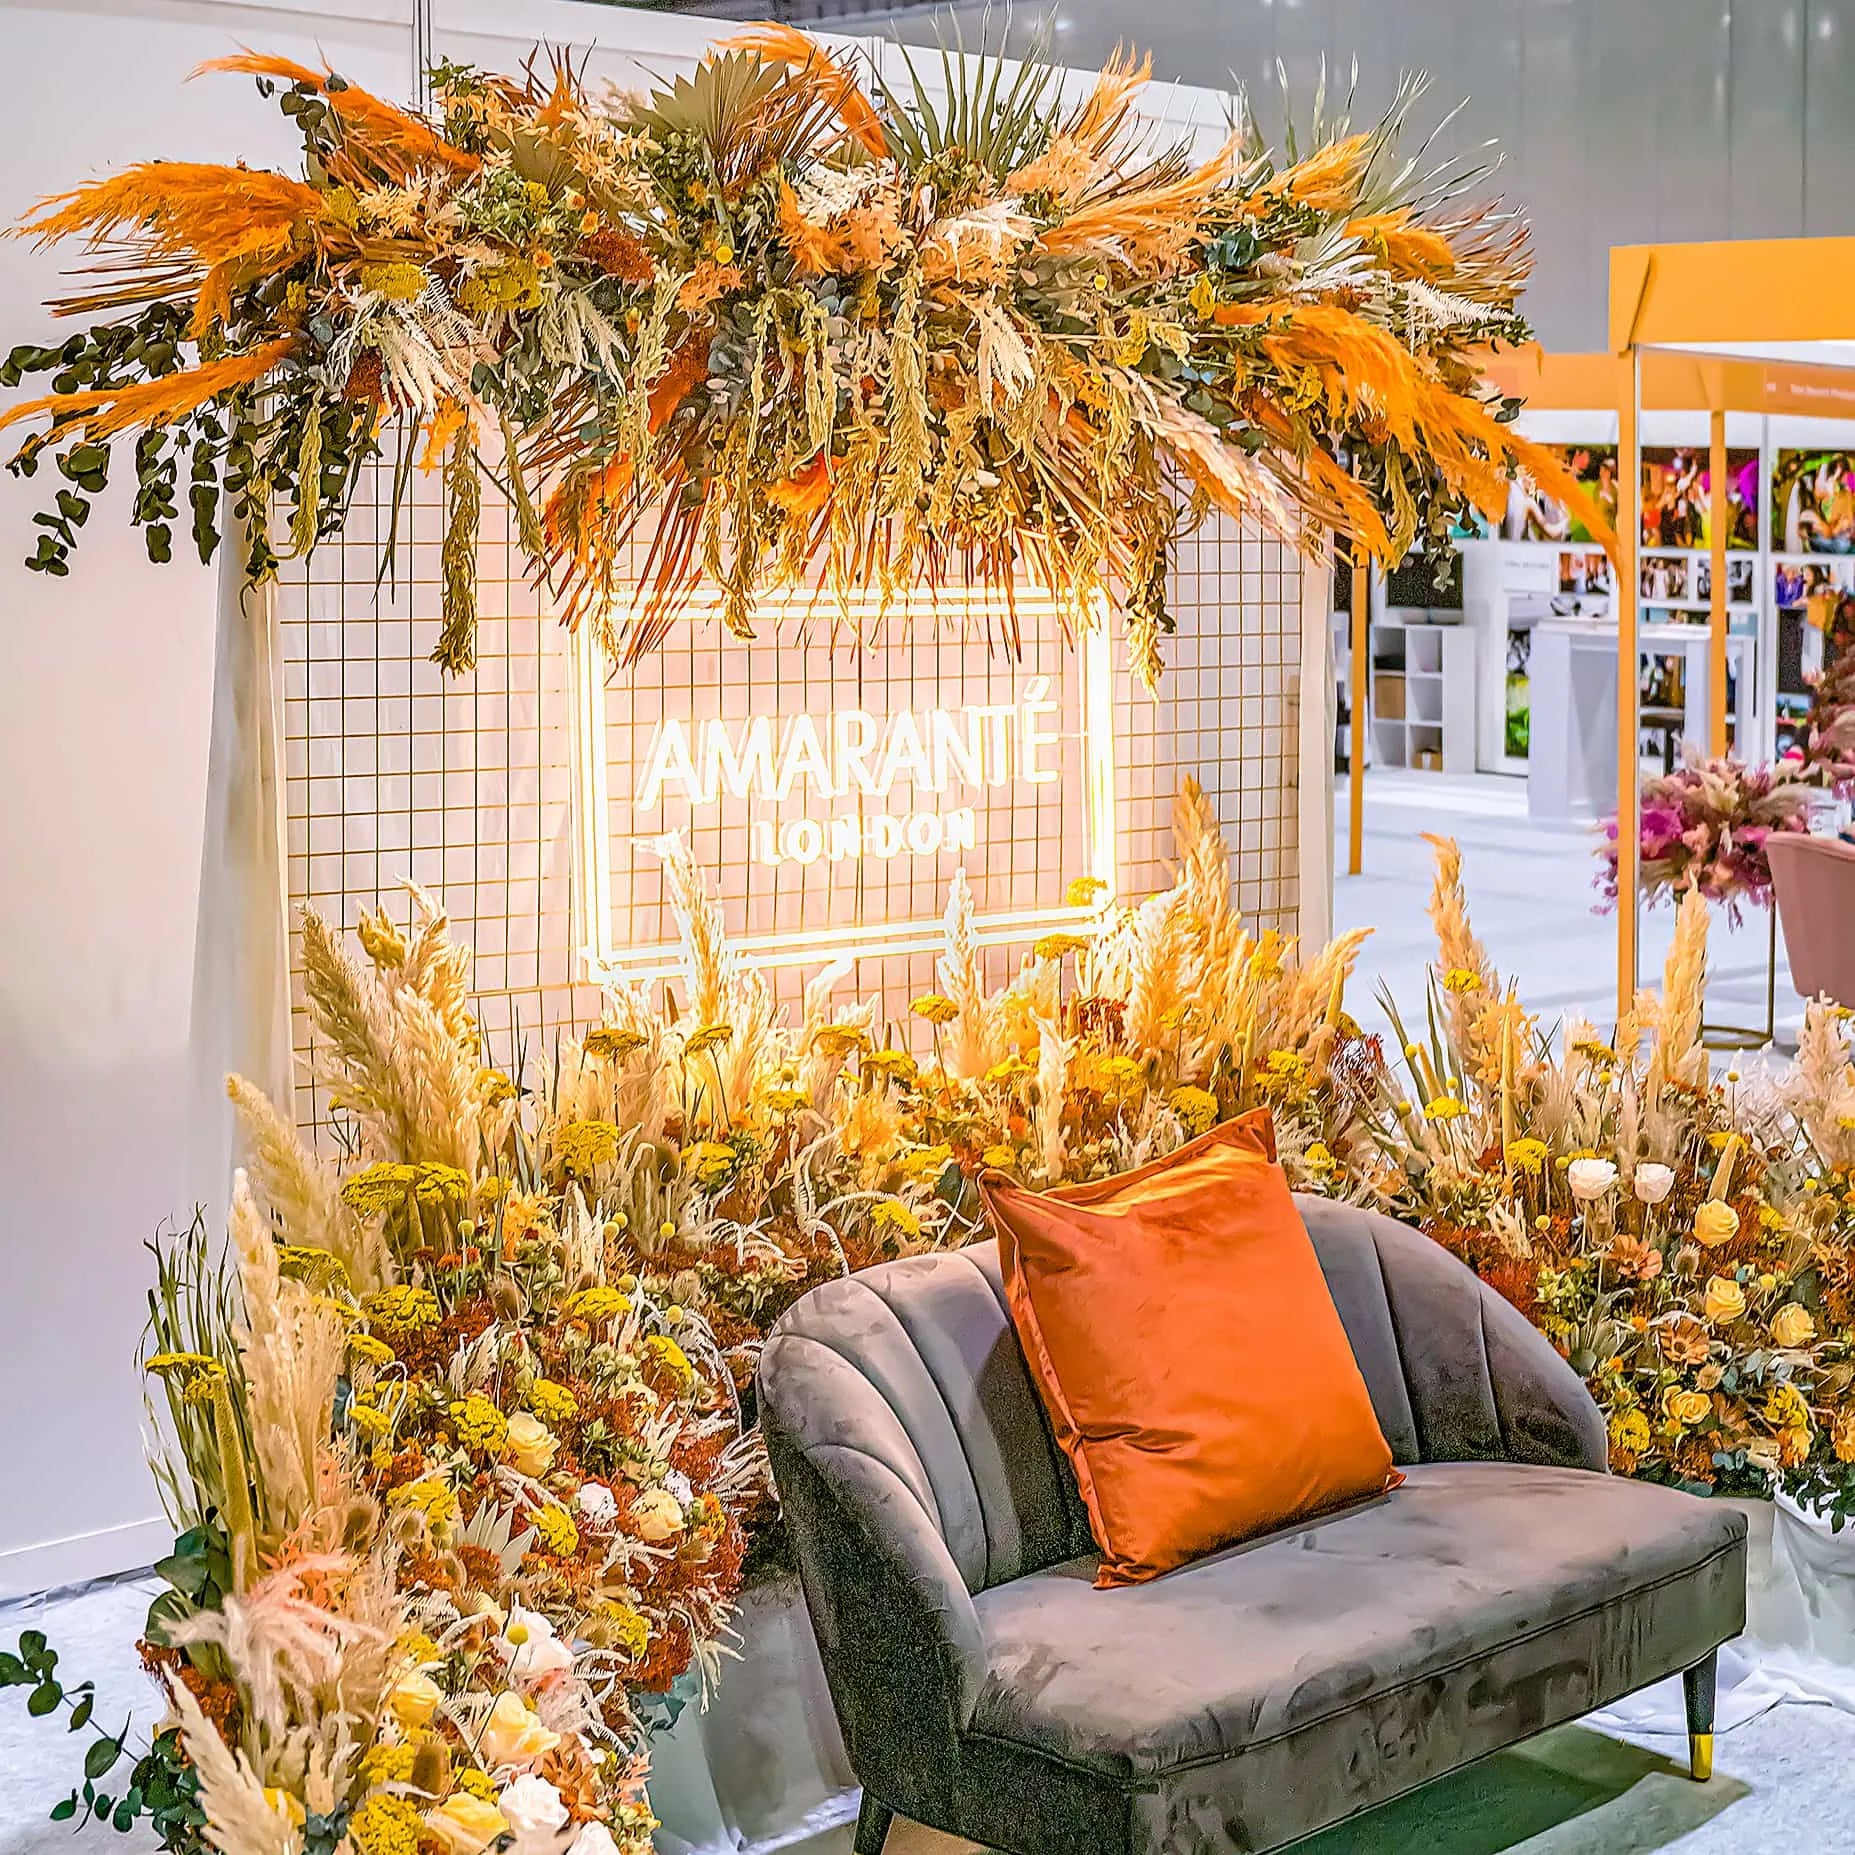 Event florist Amaranté London decked out the Excel Centre with sustainable wedding installations and arrangements for the National Wedding Show